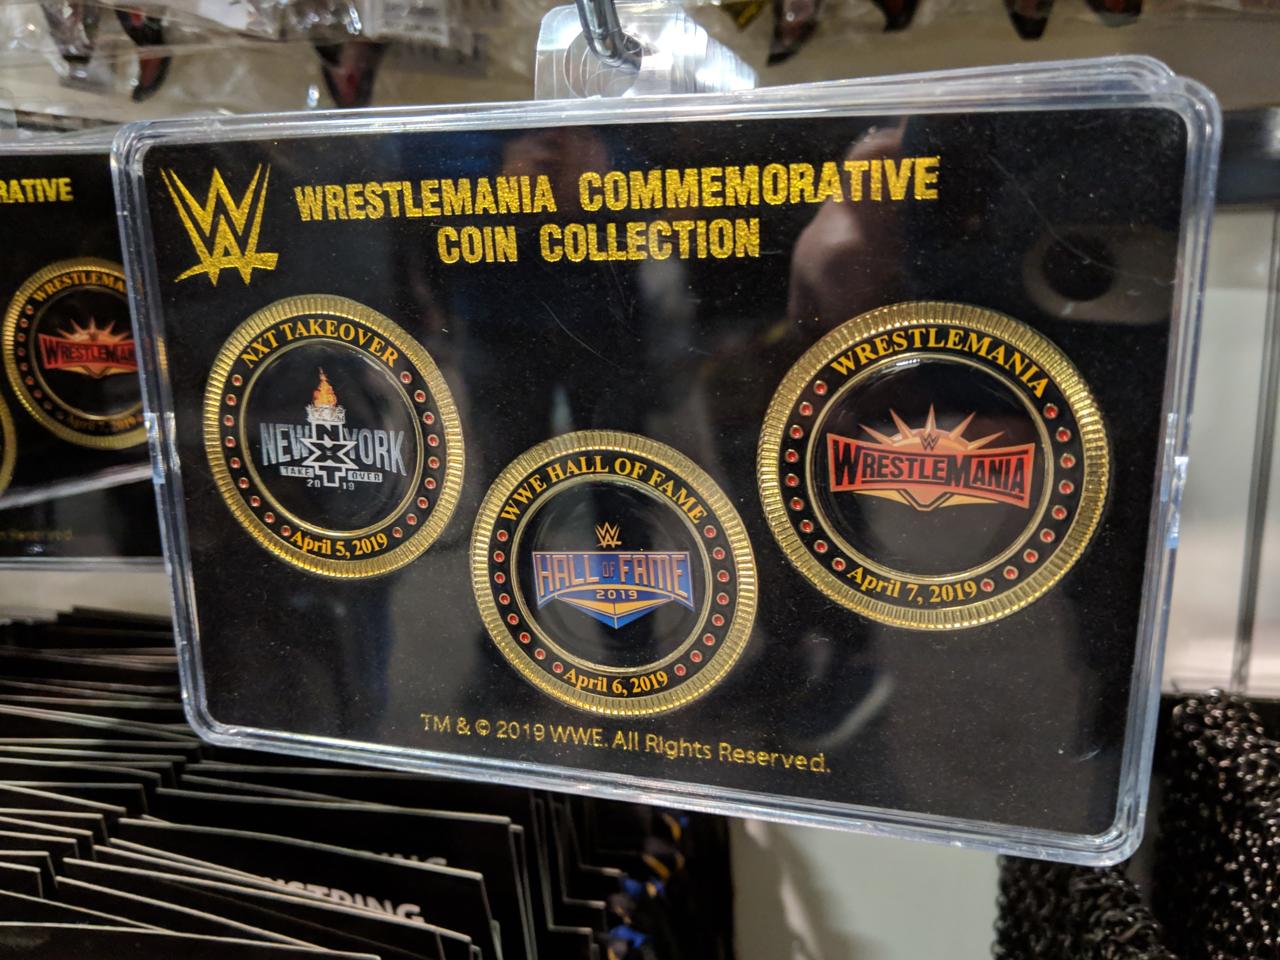 27. Wrestlemania commemorative coins that are definitely also Pog slammers